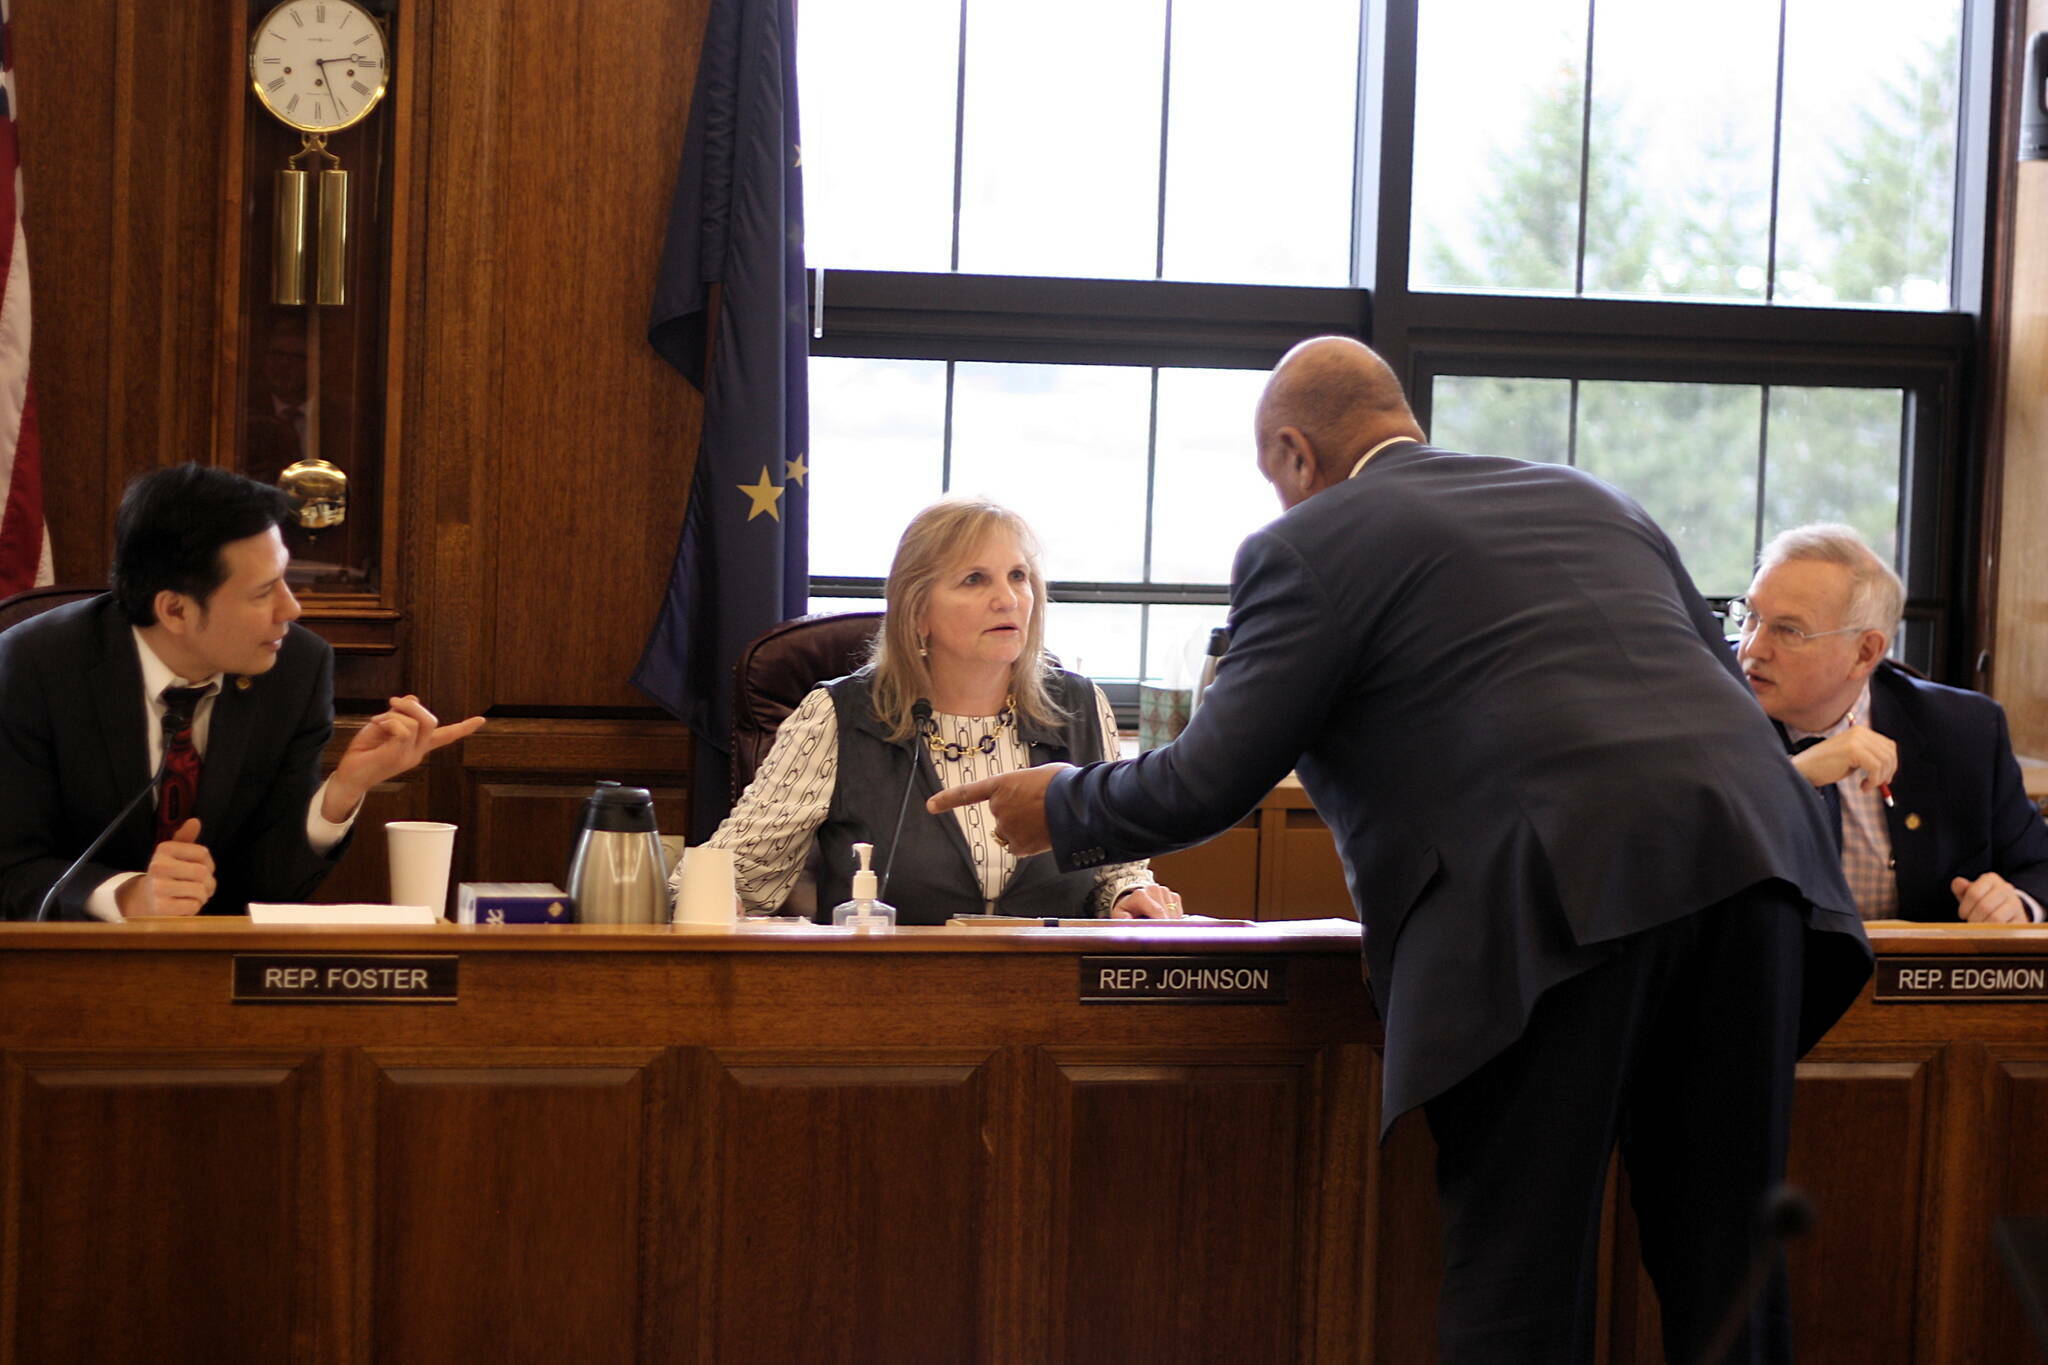 Rep. DeLena Johnson, R-Palmer, center, discusses budget legislation with her chief of staff, Remond Henderson, standing, and Reps. Neil Foster, D-Nome, left, and Bryce Edgmon, I-Dillingham on March 20, 2023. (Mark Sabbatini / Juneau Empire file photo)